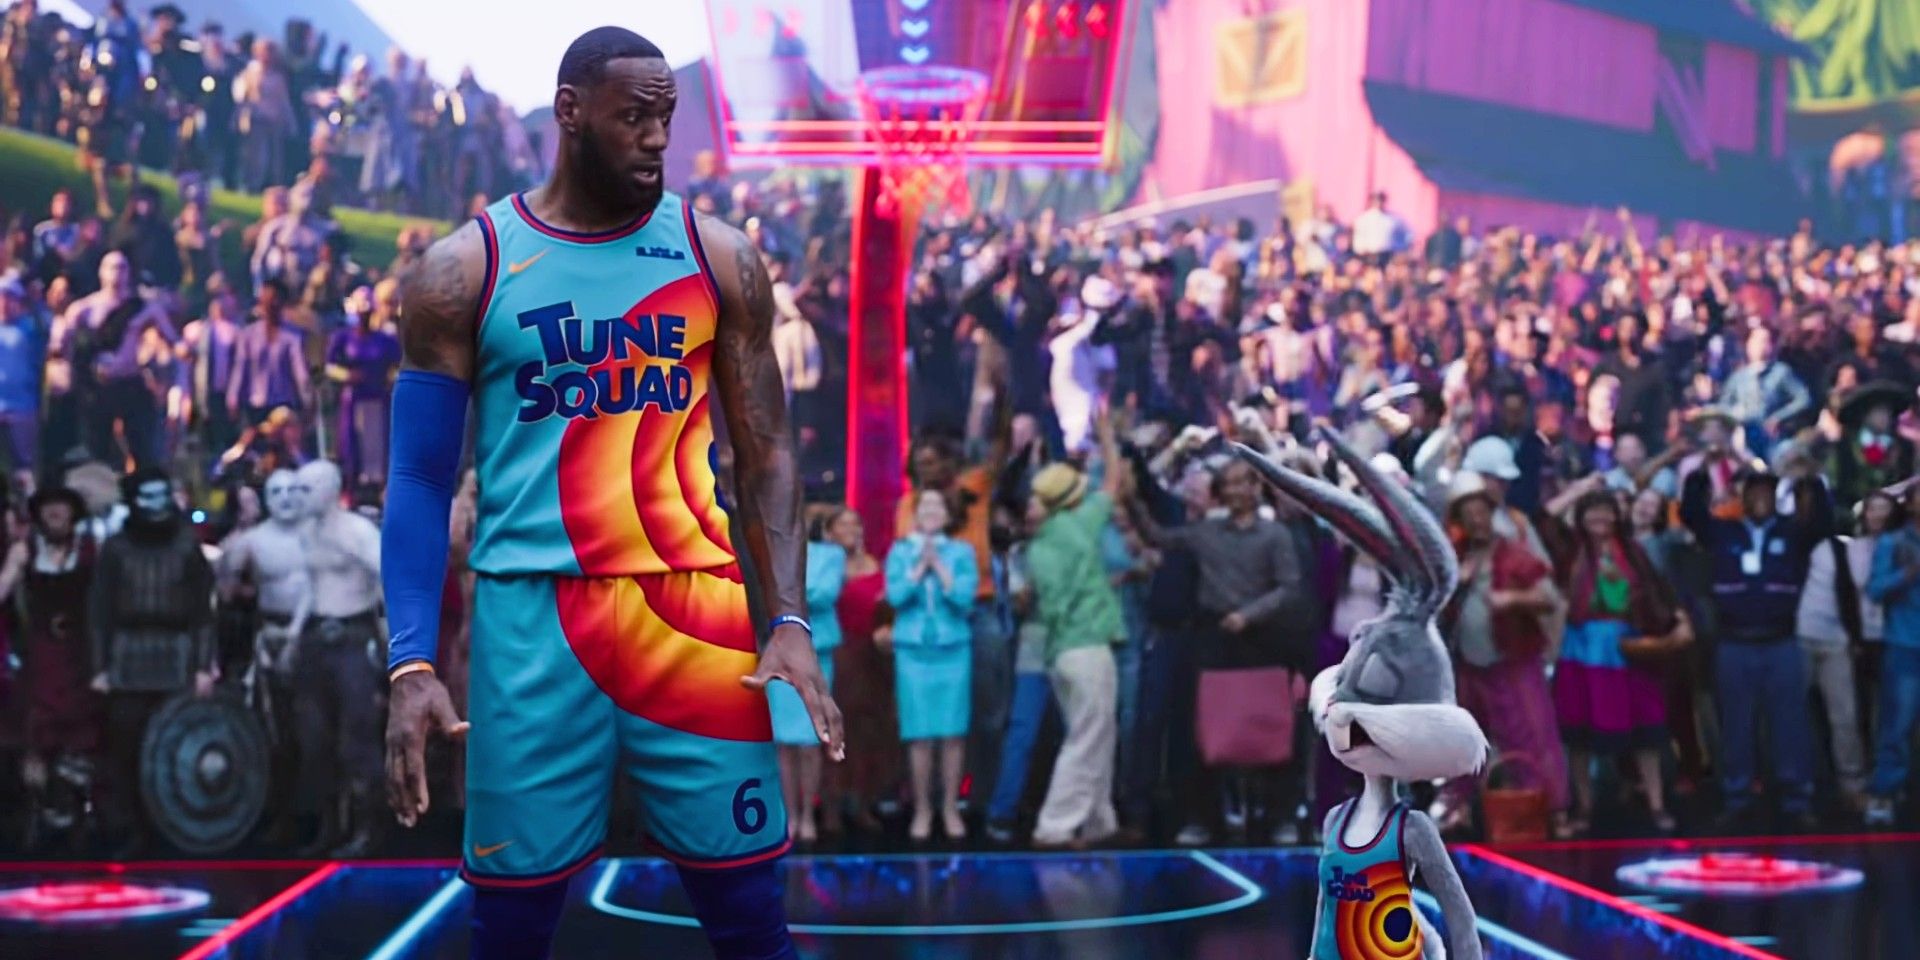 Space Jam 3 News & Updates: Everything We Know